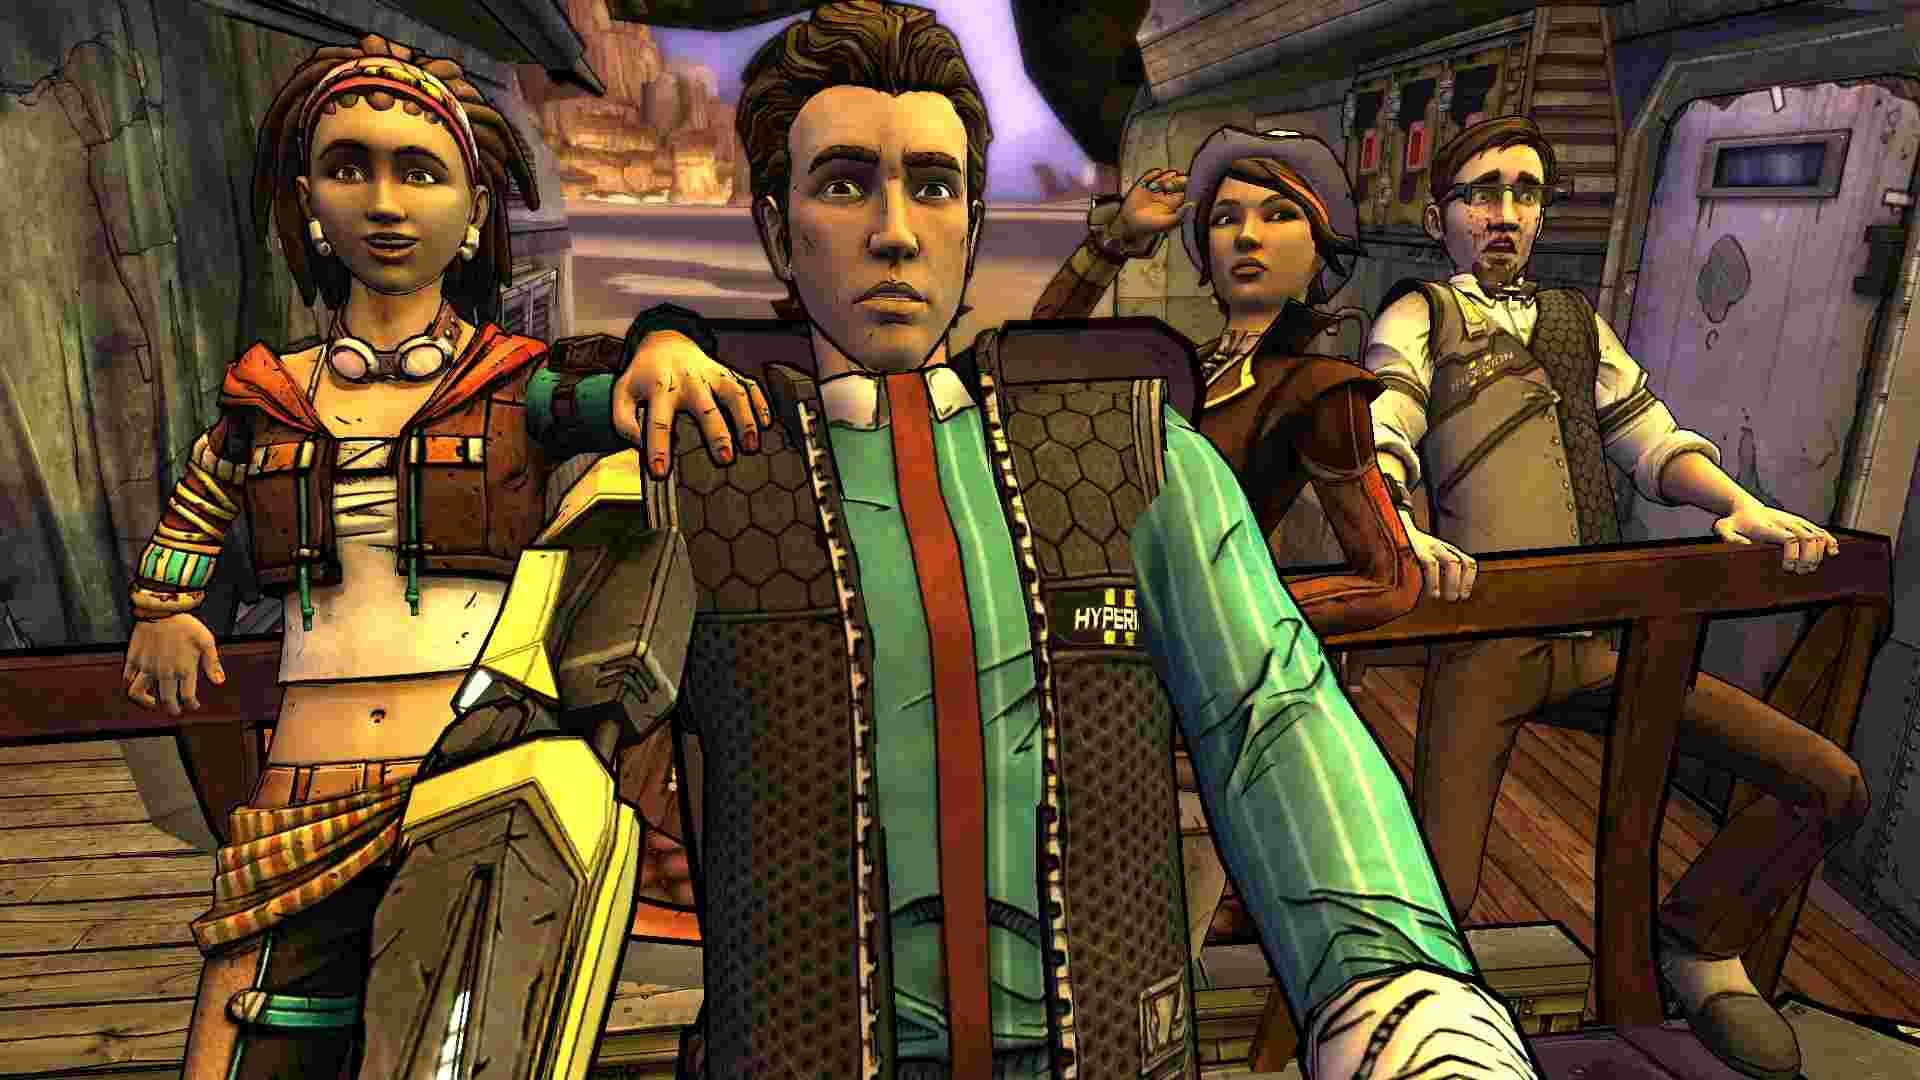 Trailer tập cuối cùng của "Tales from the Borderlands" ra mắt